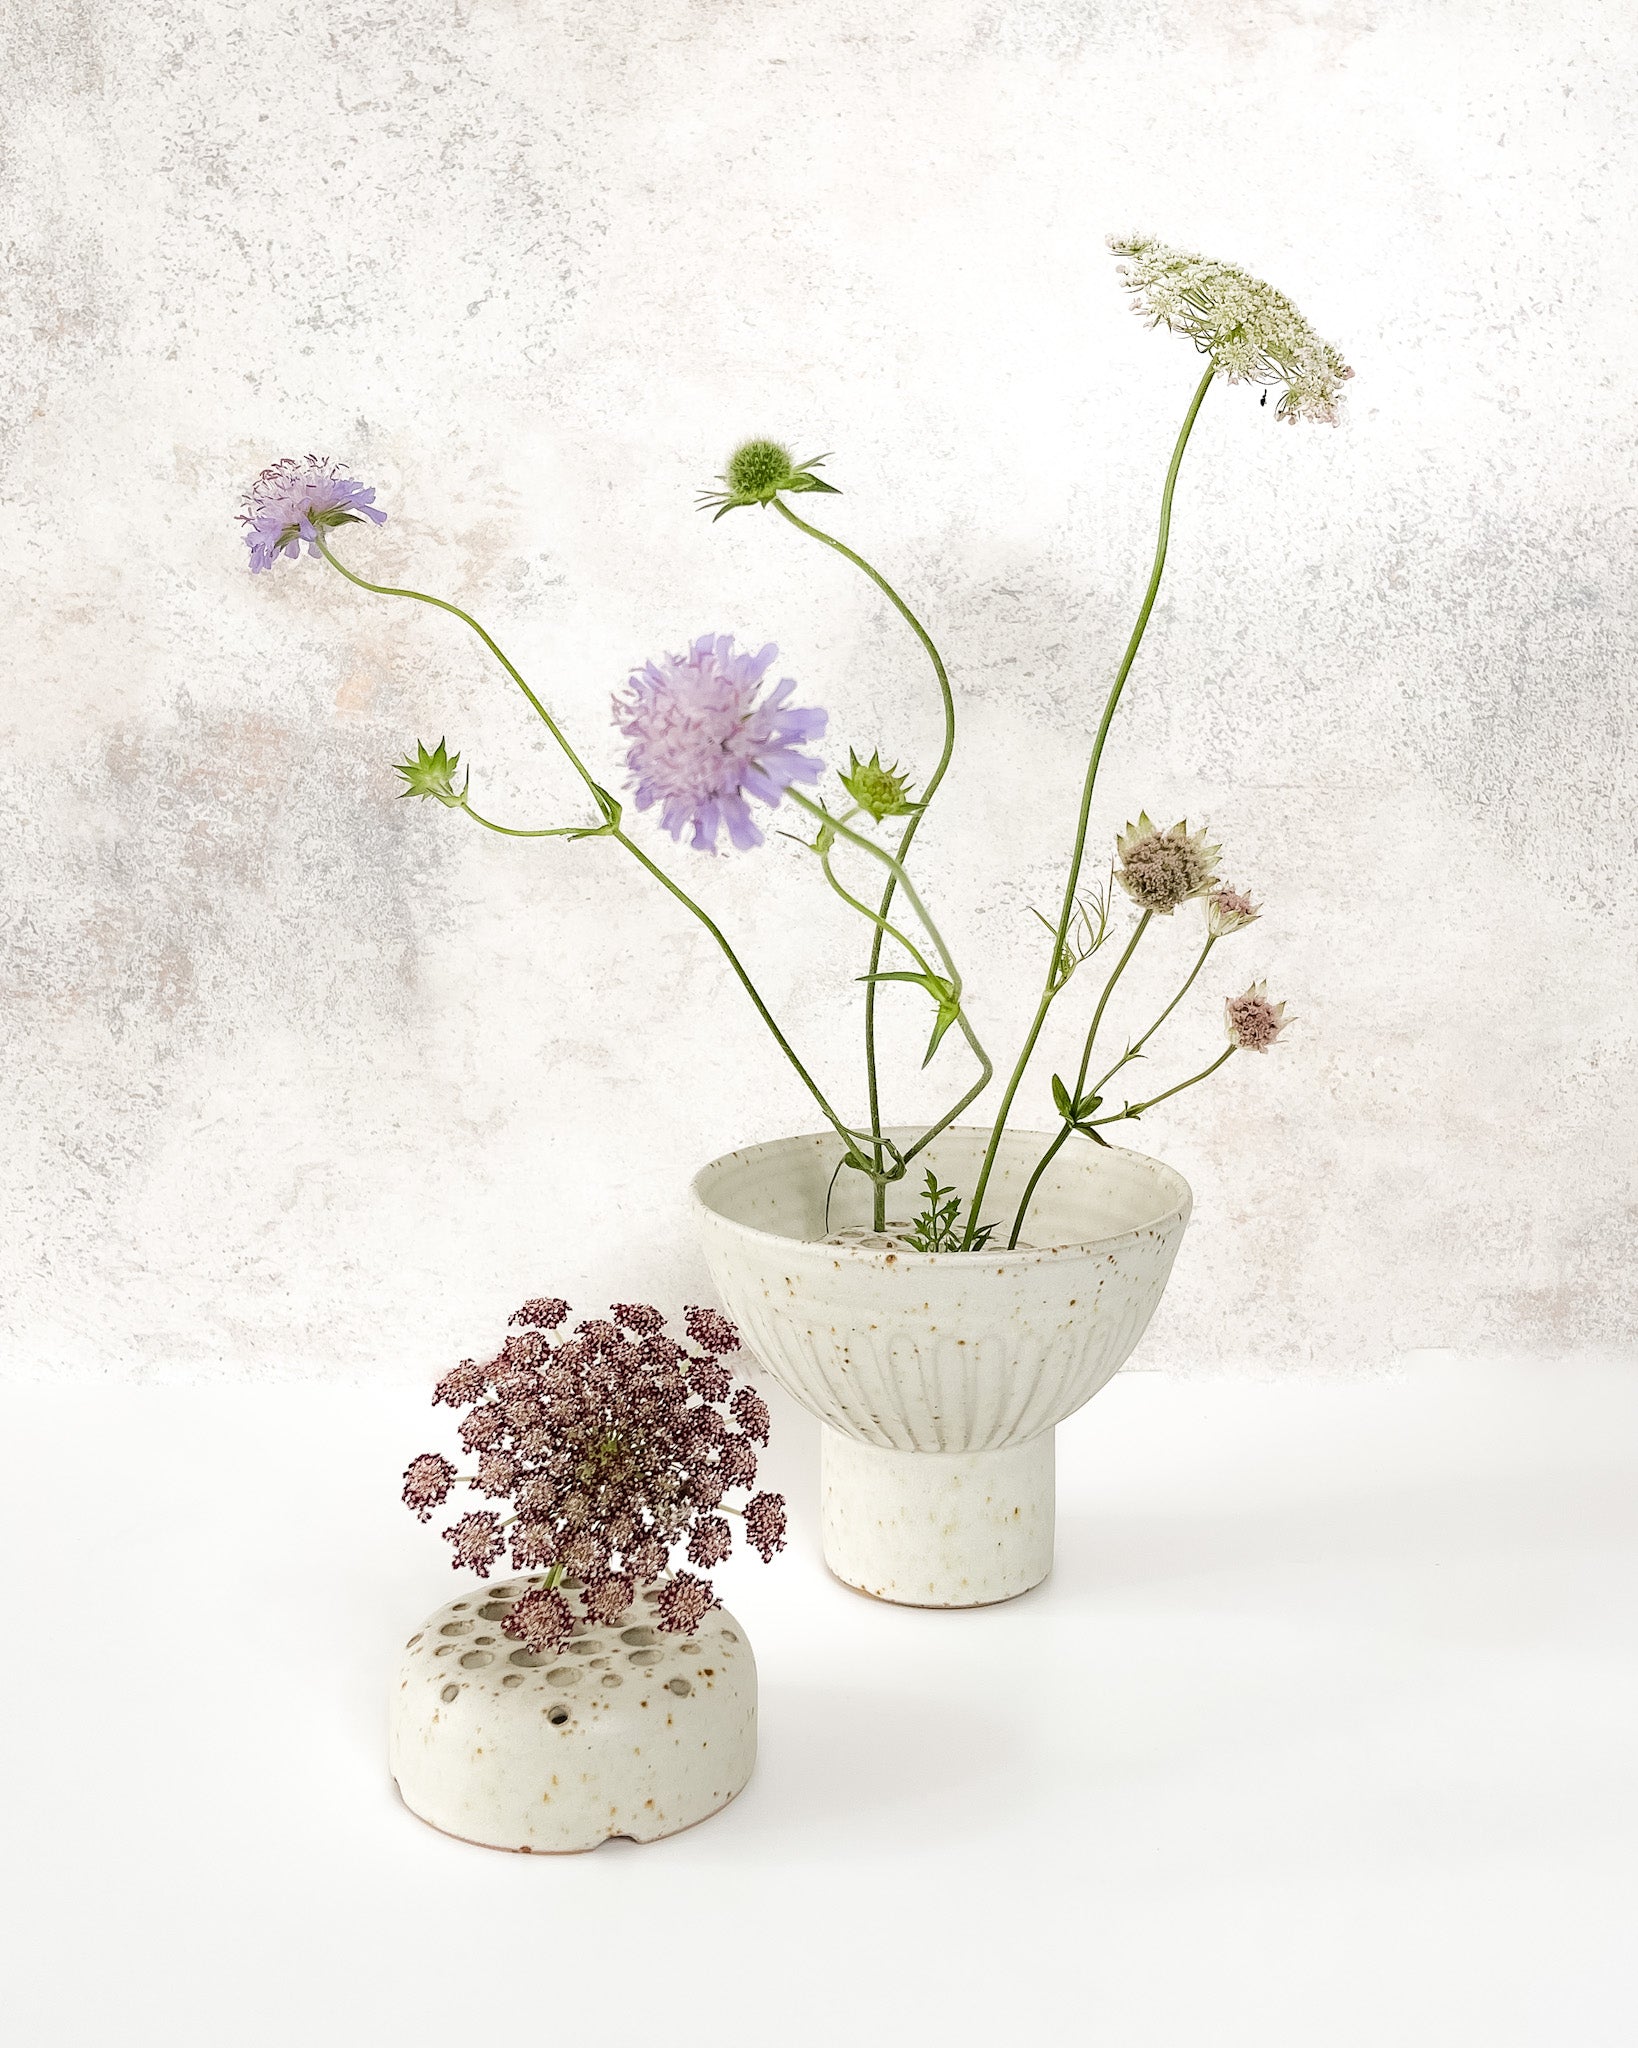 Hand-thrown ceramic Ikebana vase set with speckled clay, carved texture, and an elevated base, featuring a stem holder for floral displays.